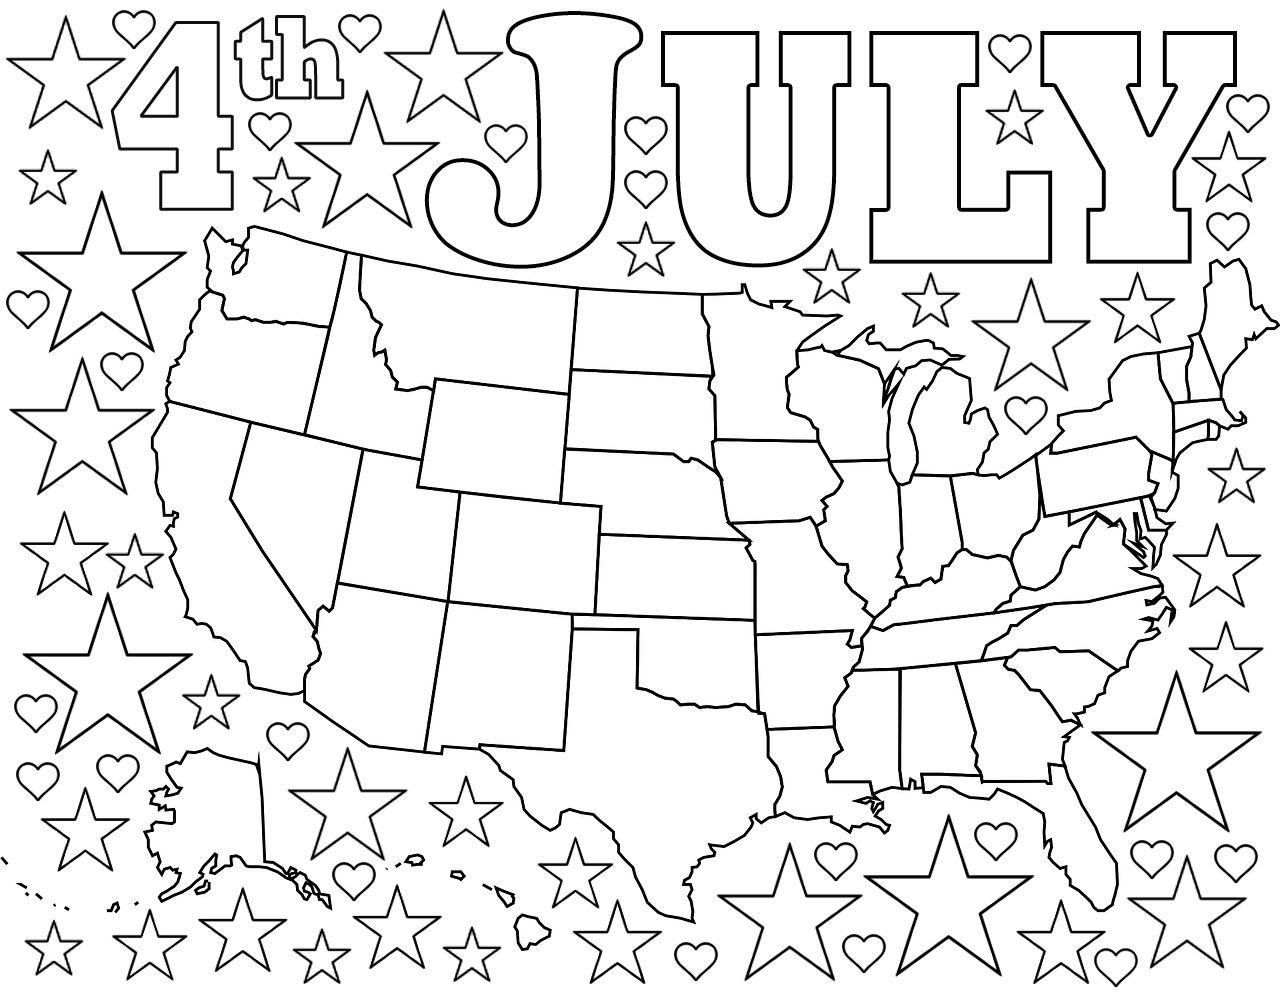 Leaf Templates - Free Printable Templates & 44+ 4Th Of July Coloring Pages - FirstPalette.com